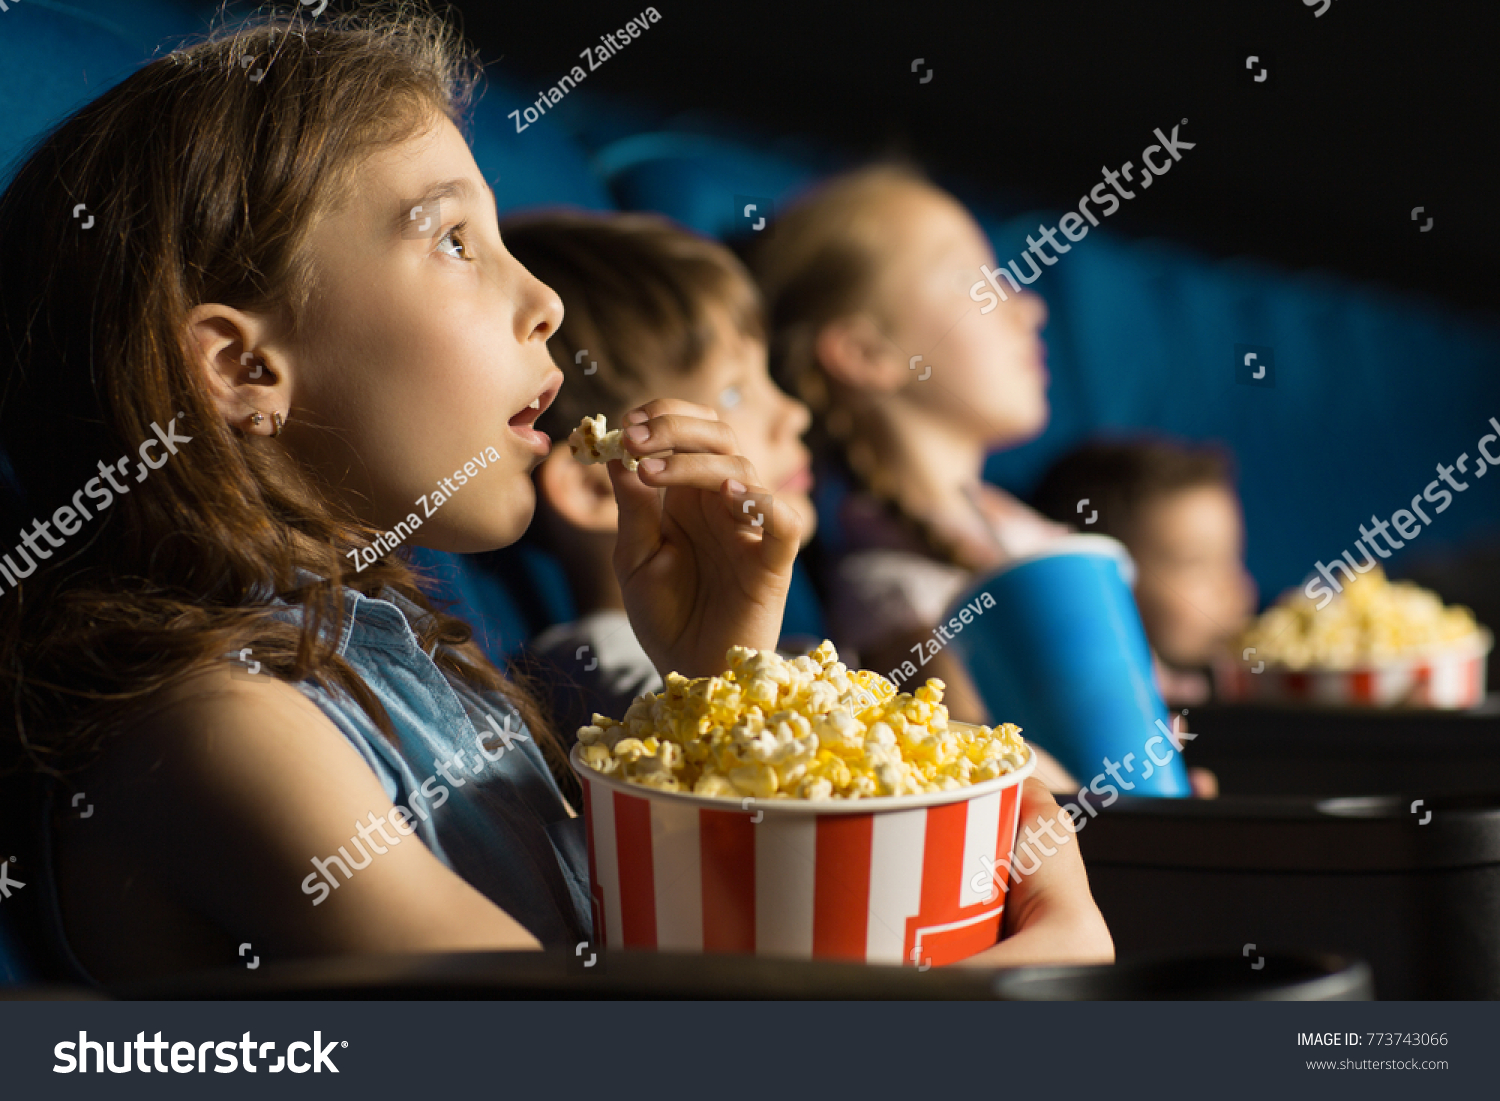 Beautiful little girl looking fascinated eating popcorn watching a movie at the local movie theatre snack bucket junk food tasty childhood entertaining entertained emotions kids concept #773743066